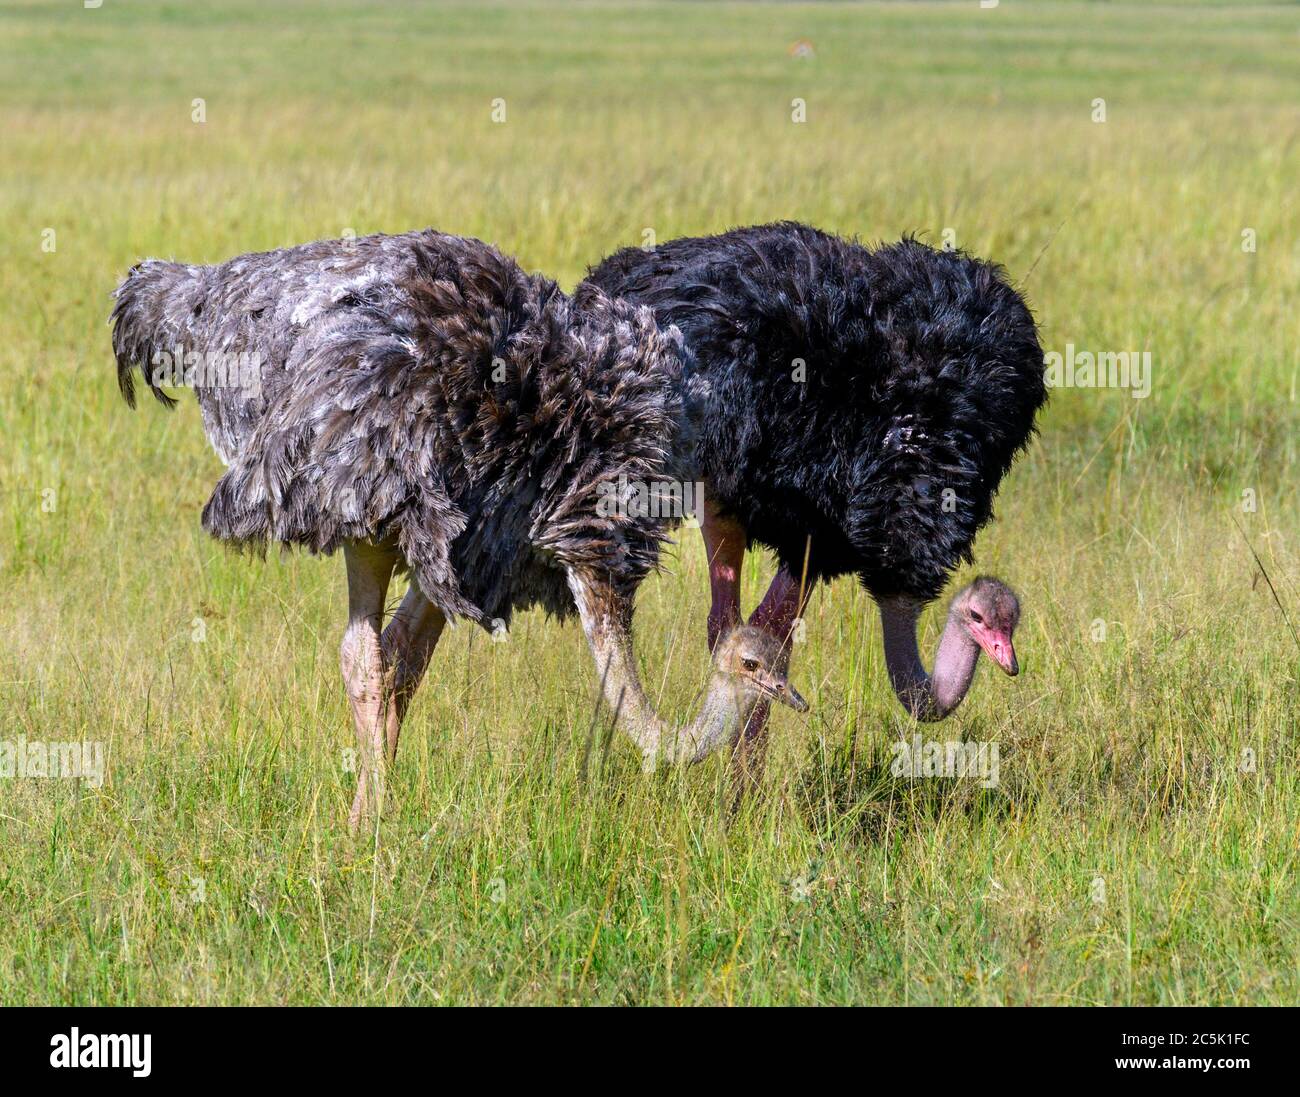 Common Ostrich (Struthio camelus). Male and female ostriches, Masai Mara National Reserve, Kenya, East Africa Stock Photo